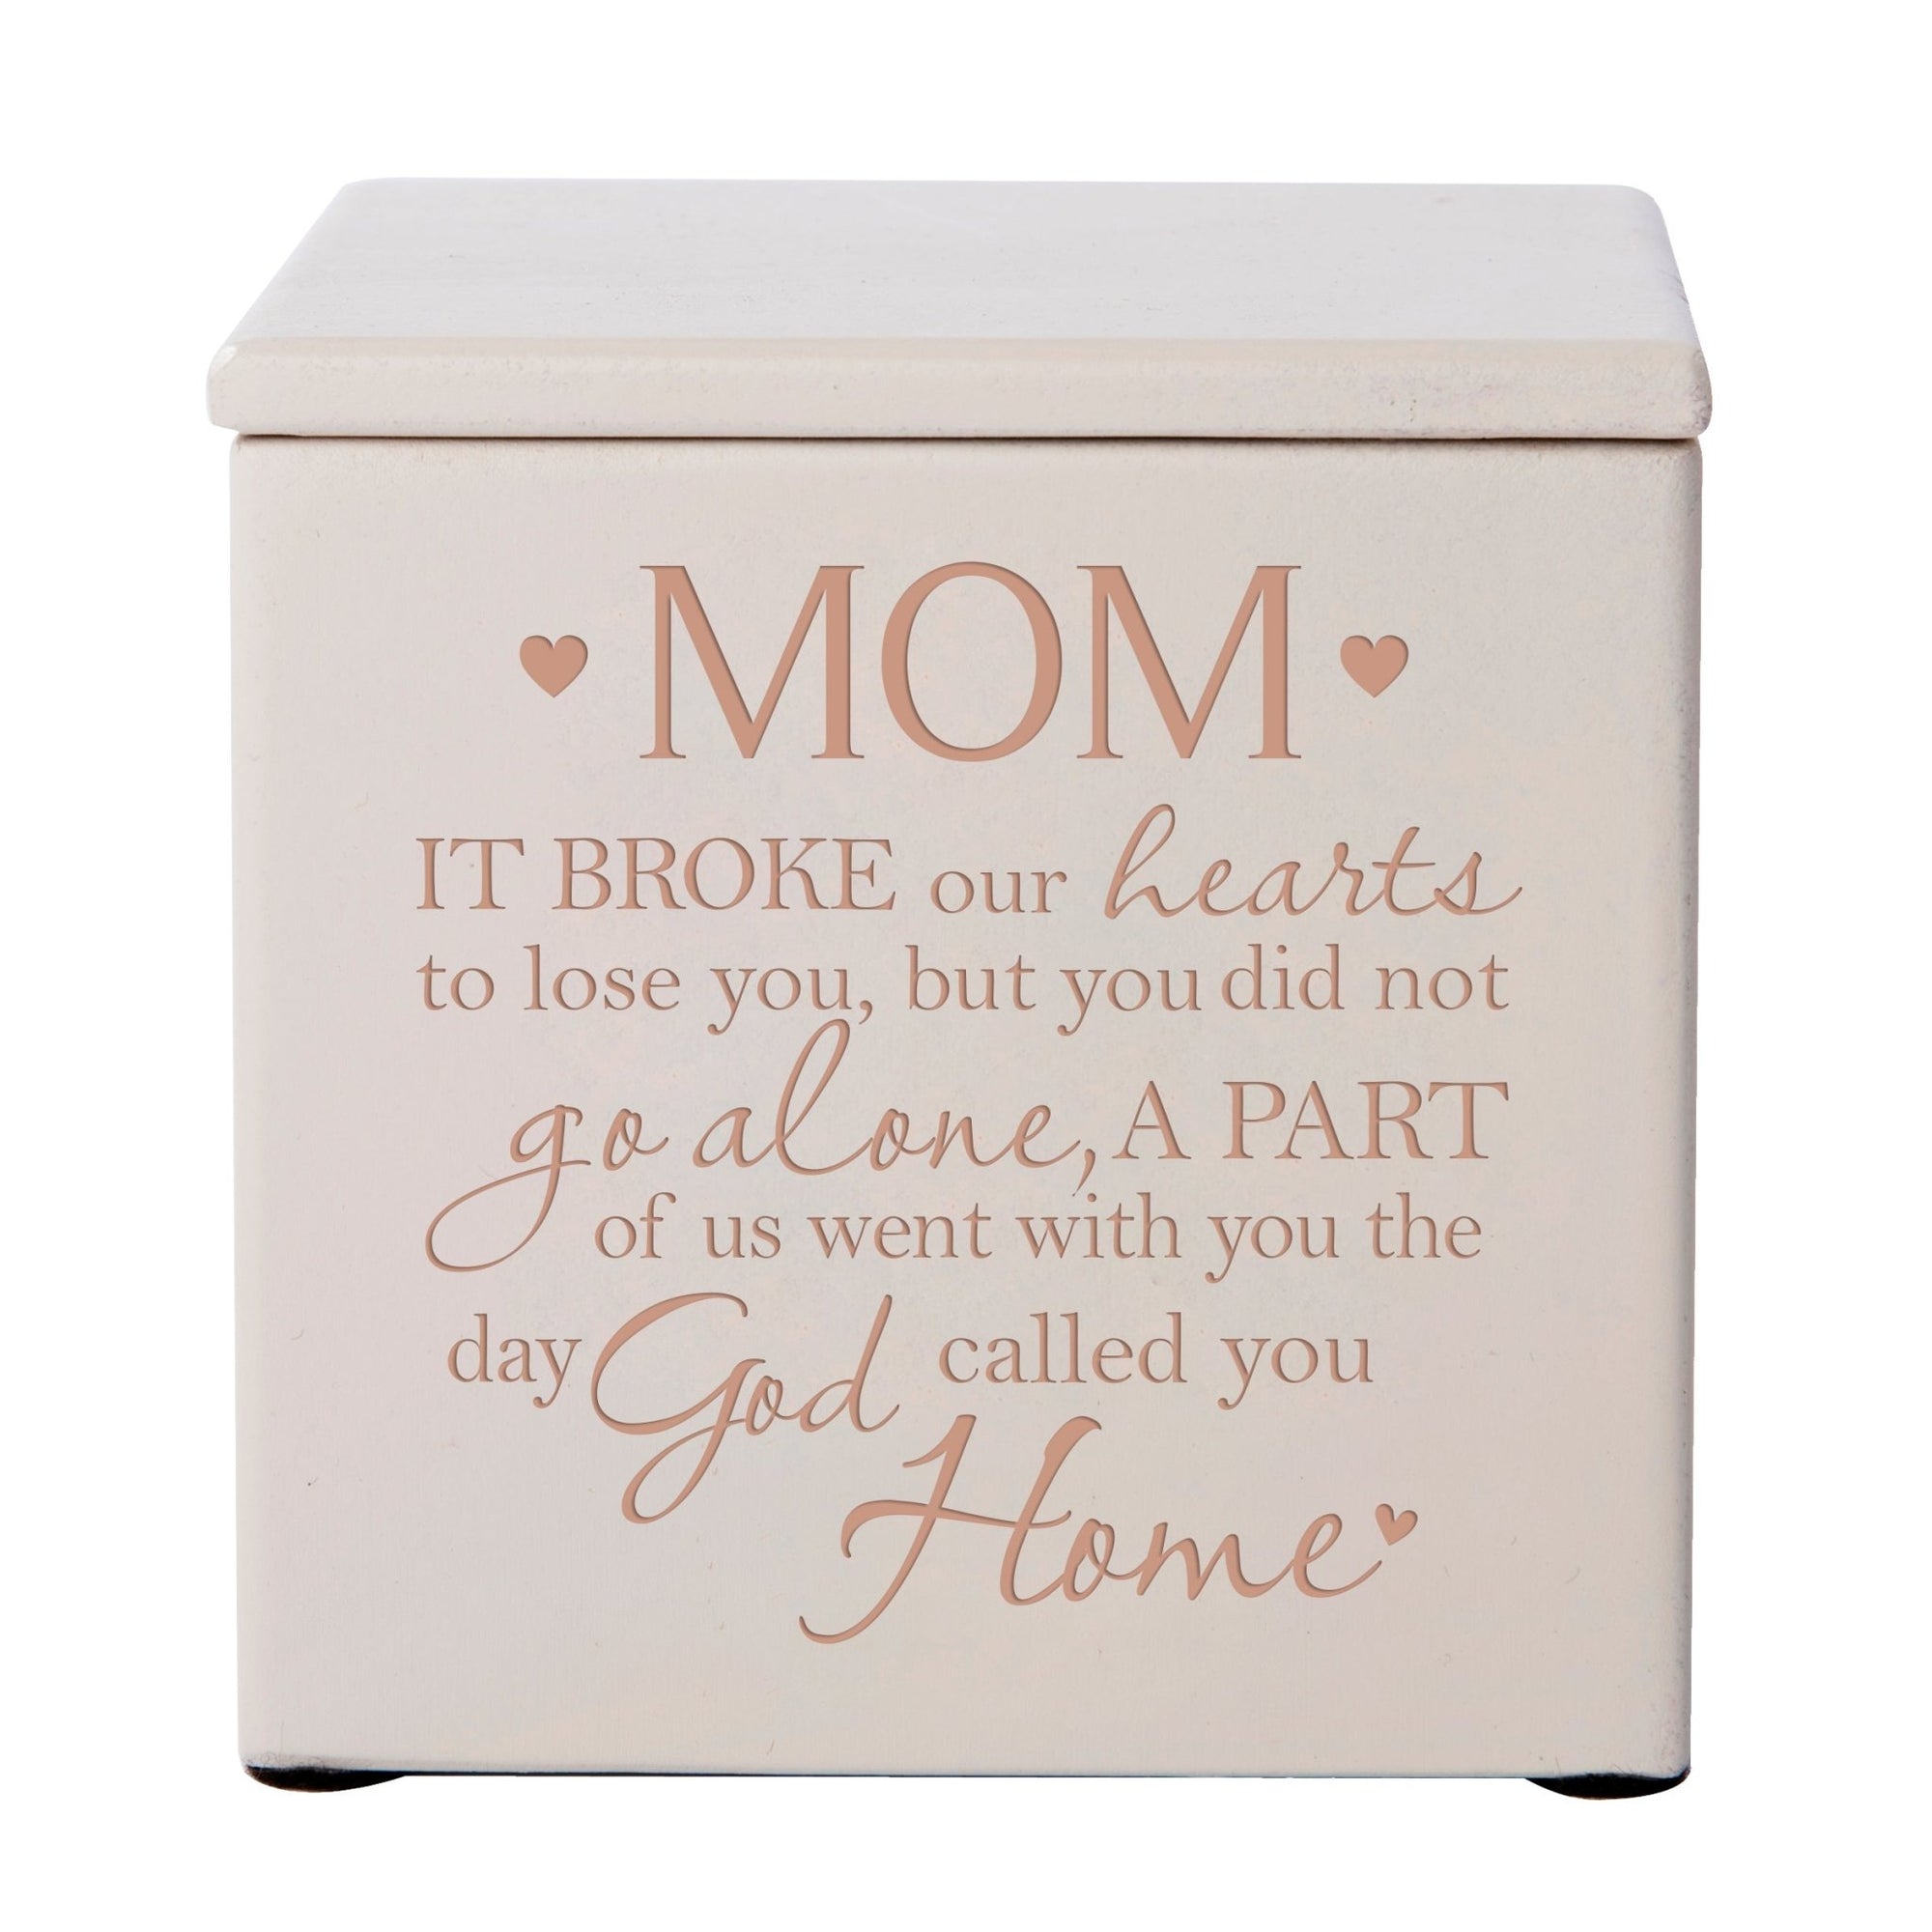 Modern Inspirational Memorial Wooden Cremation Urn Box 4.5x4.5in Holds 49 Cu Inches Of Human Ashes (It Broke Our Hearts Mom) Funeral and Commemorative Keepsake - LifeSong Milestones